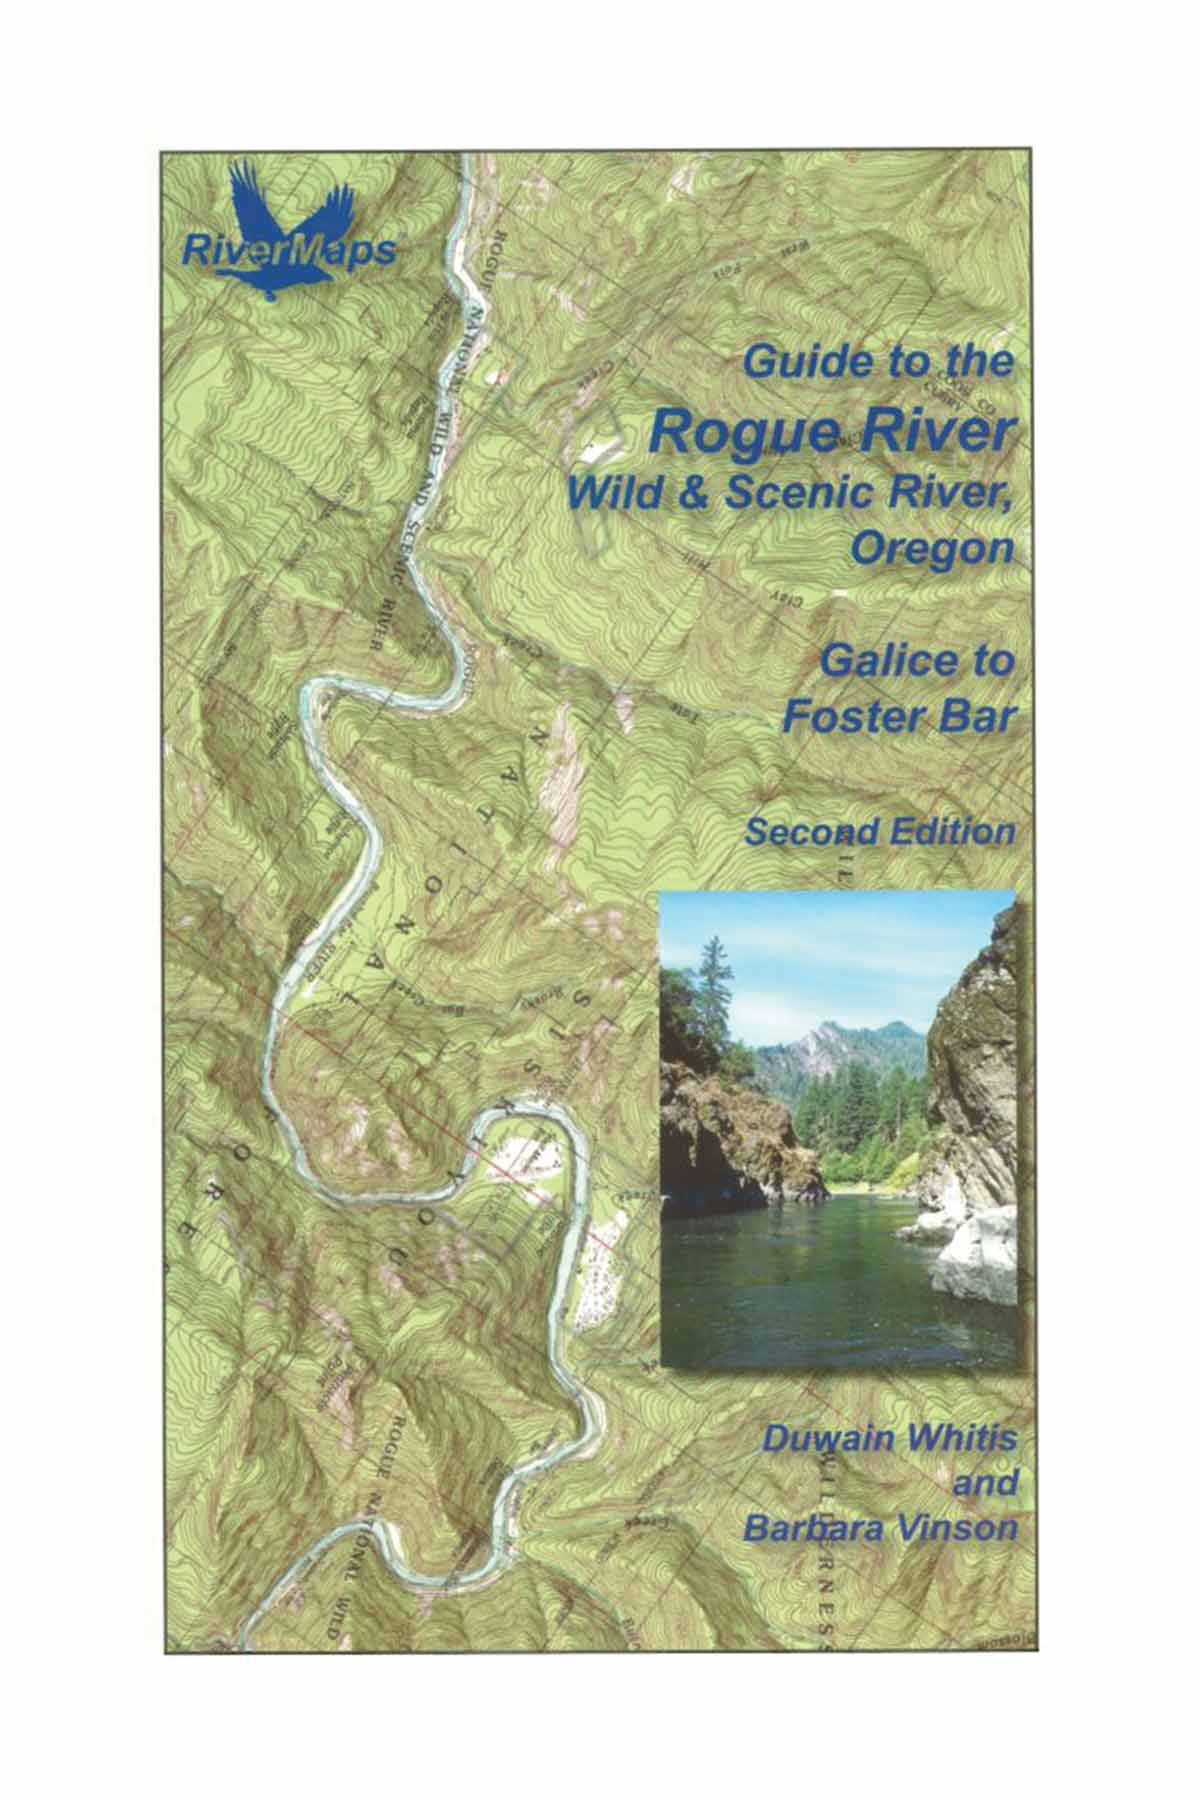 RiverMaps Rogue River 2nd Edition Guide Book